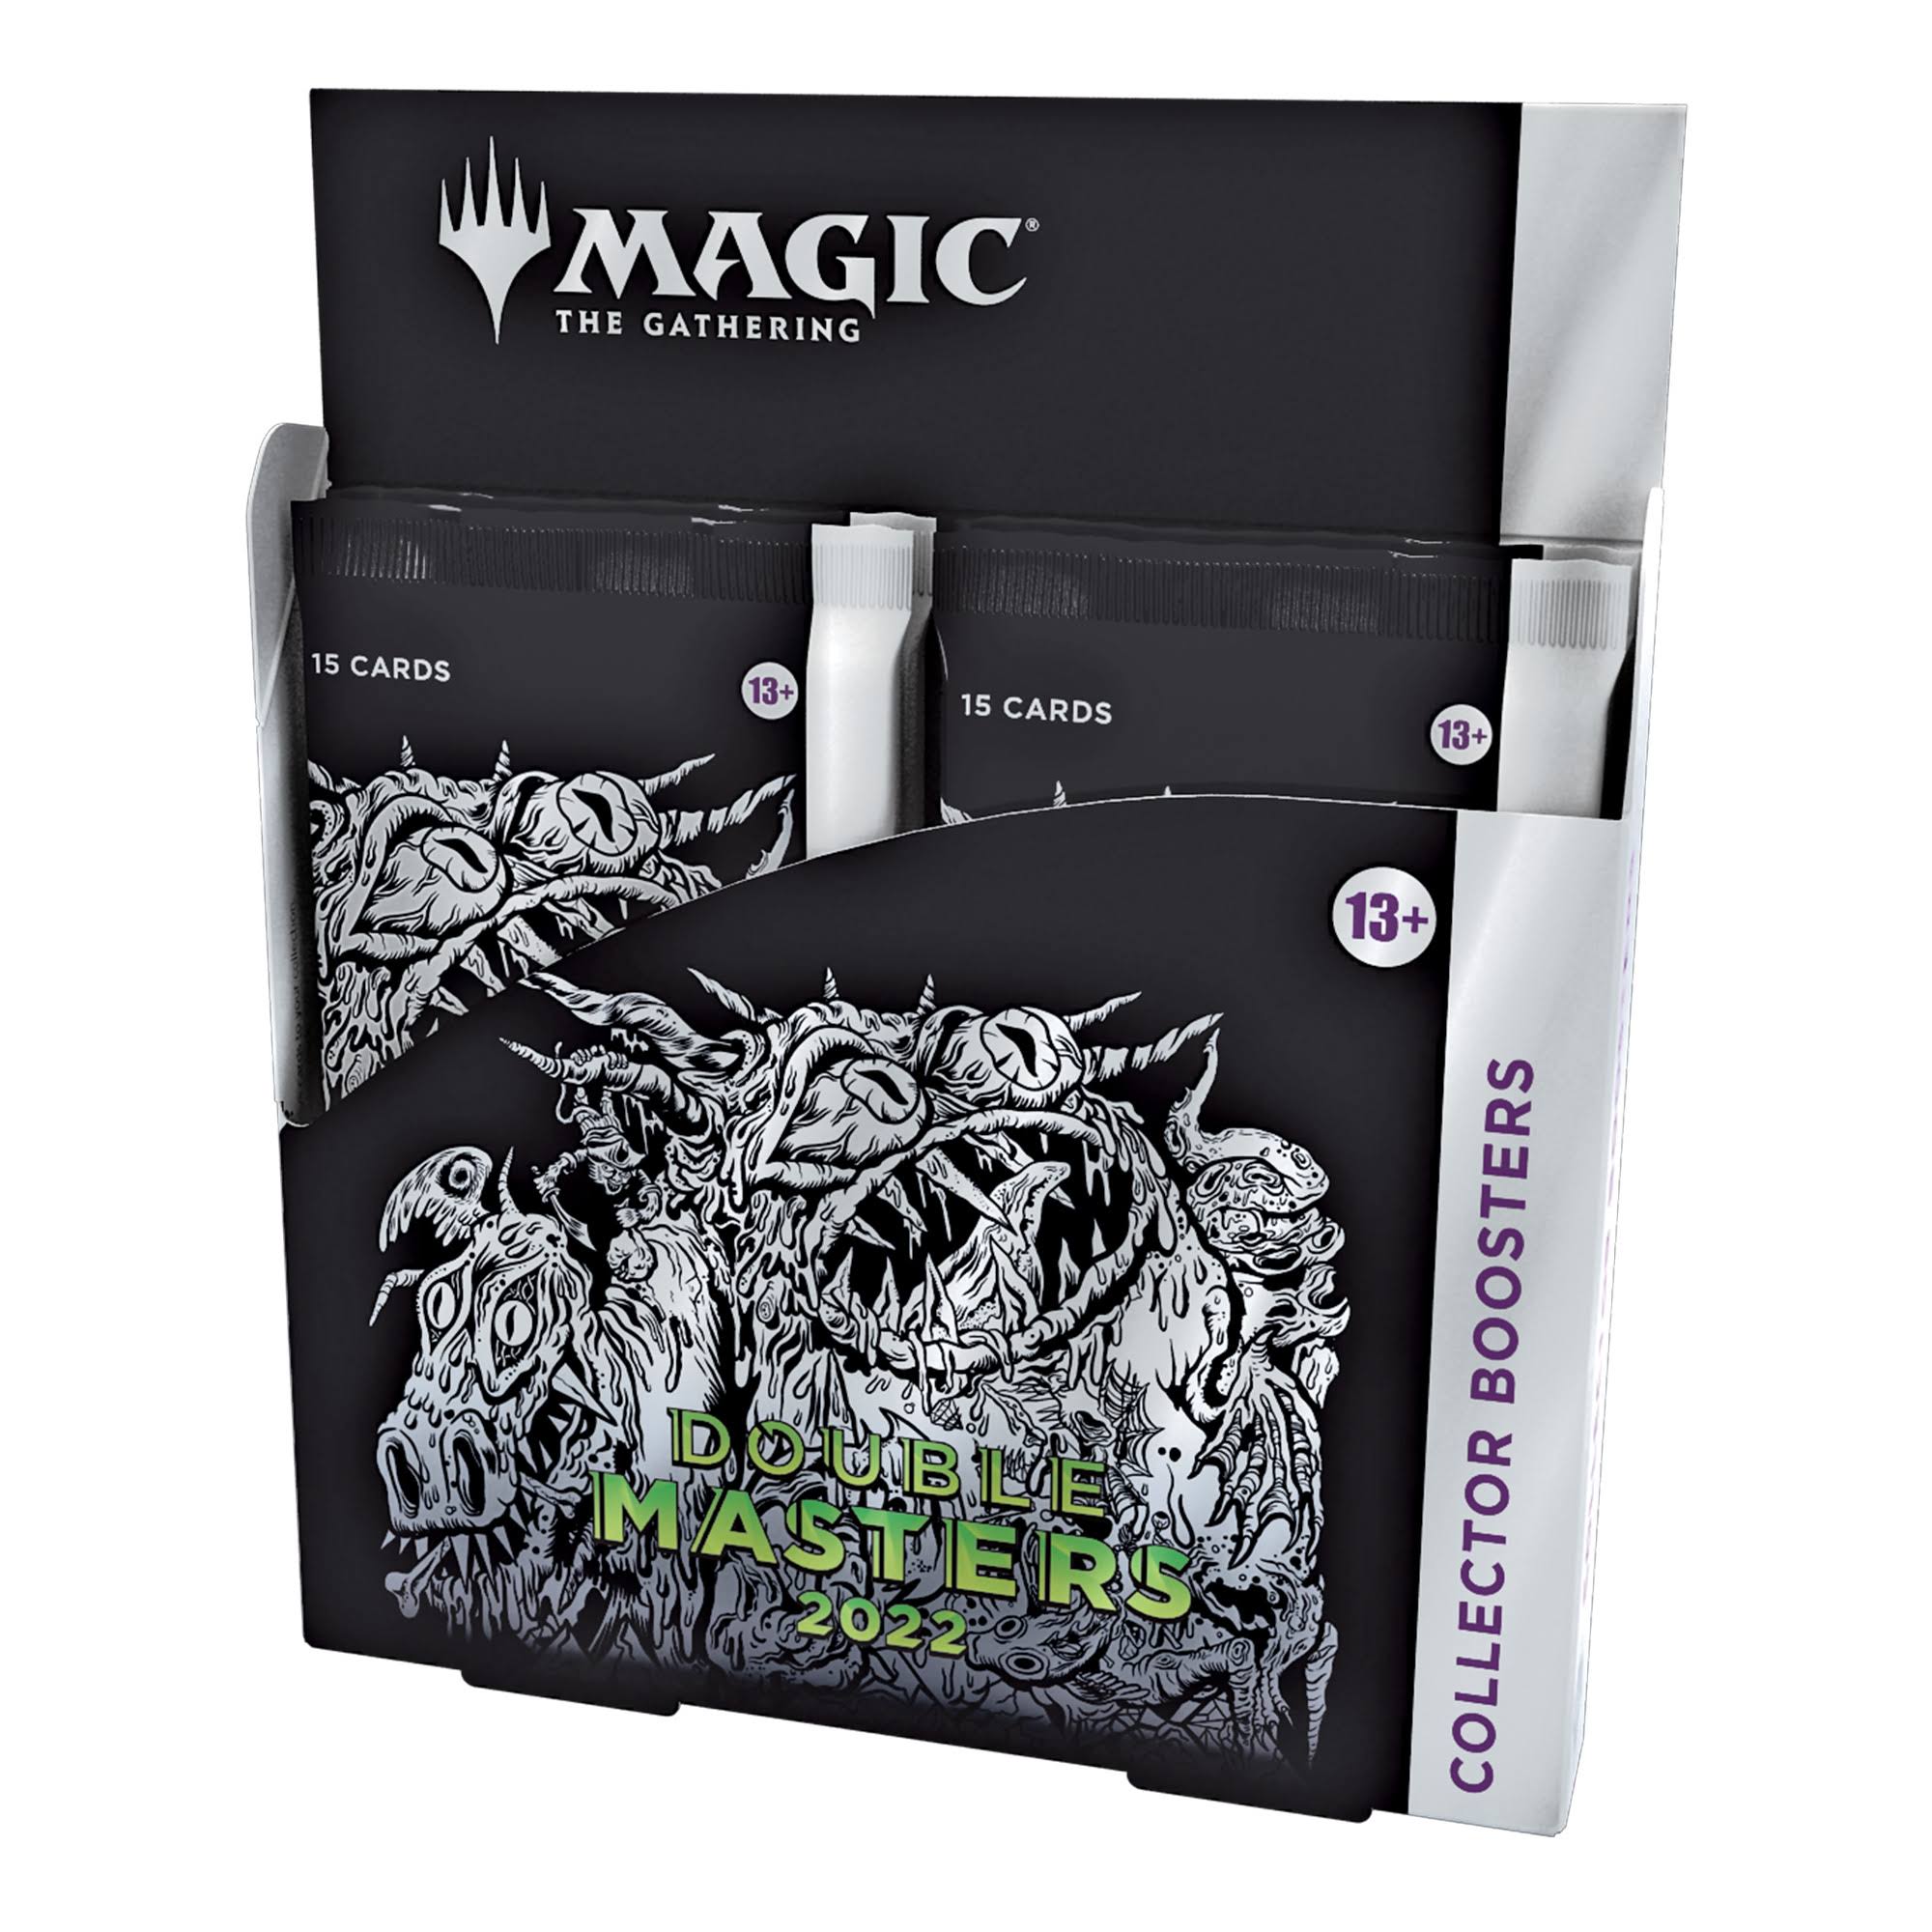 Magic The Gathering - Double Masters 2022 - Collector Booster Box